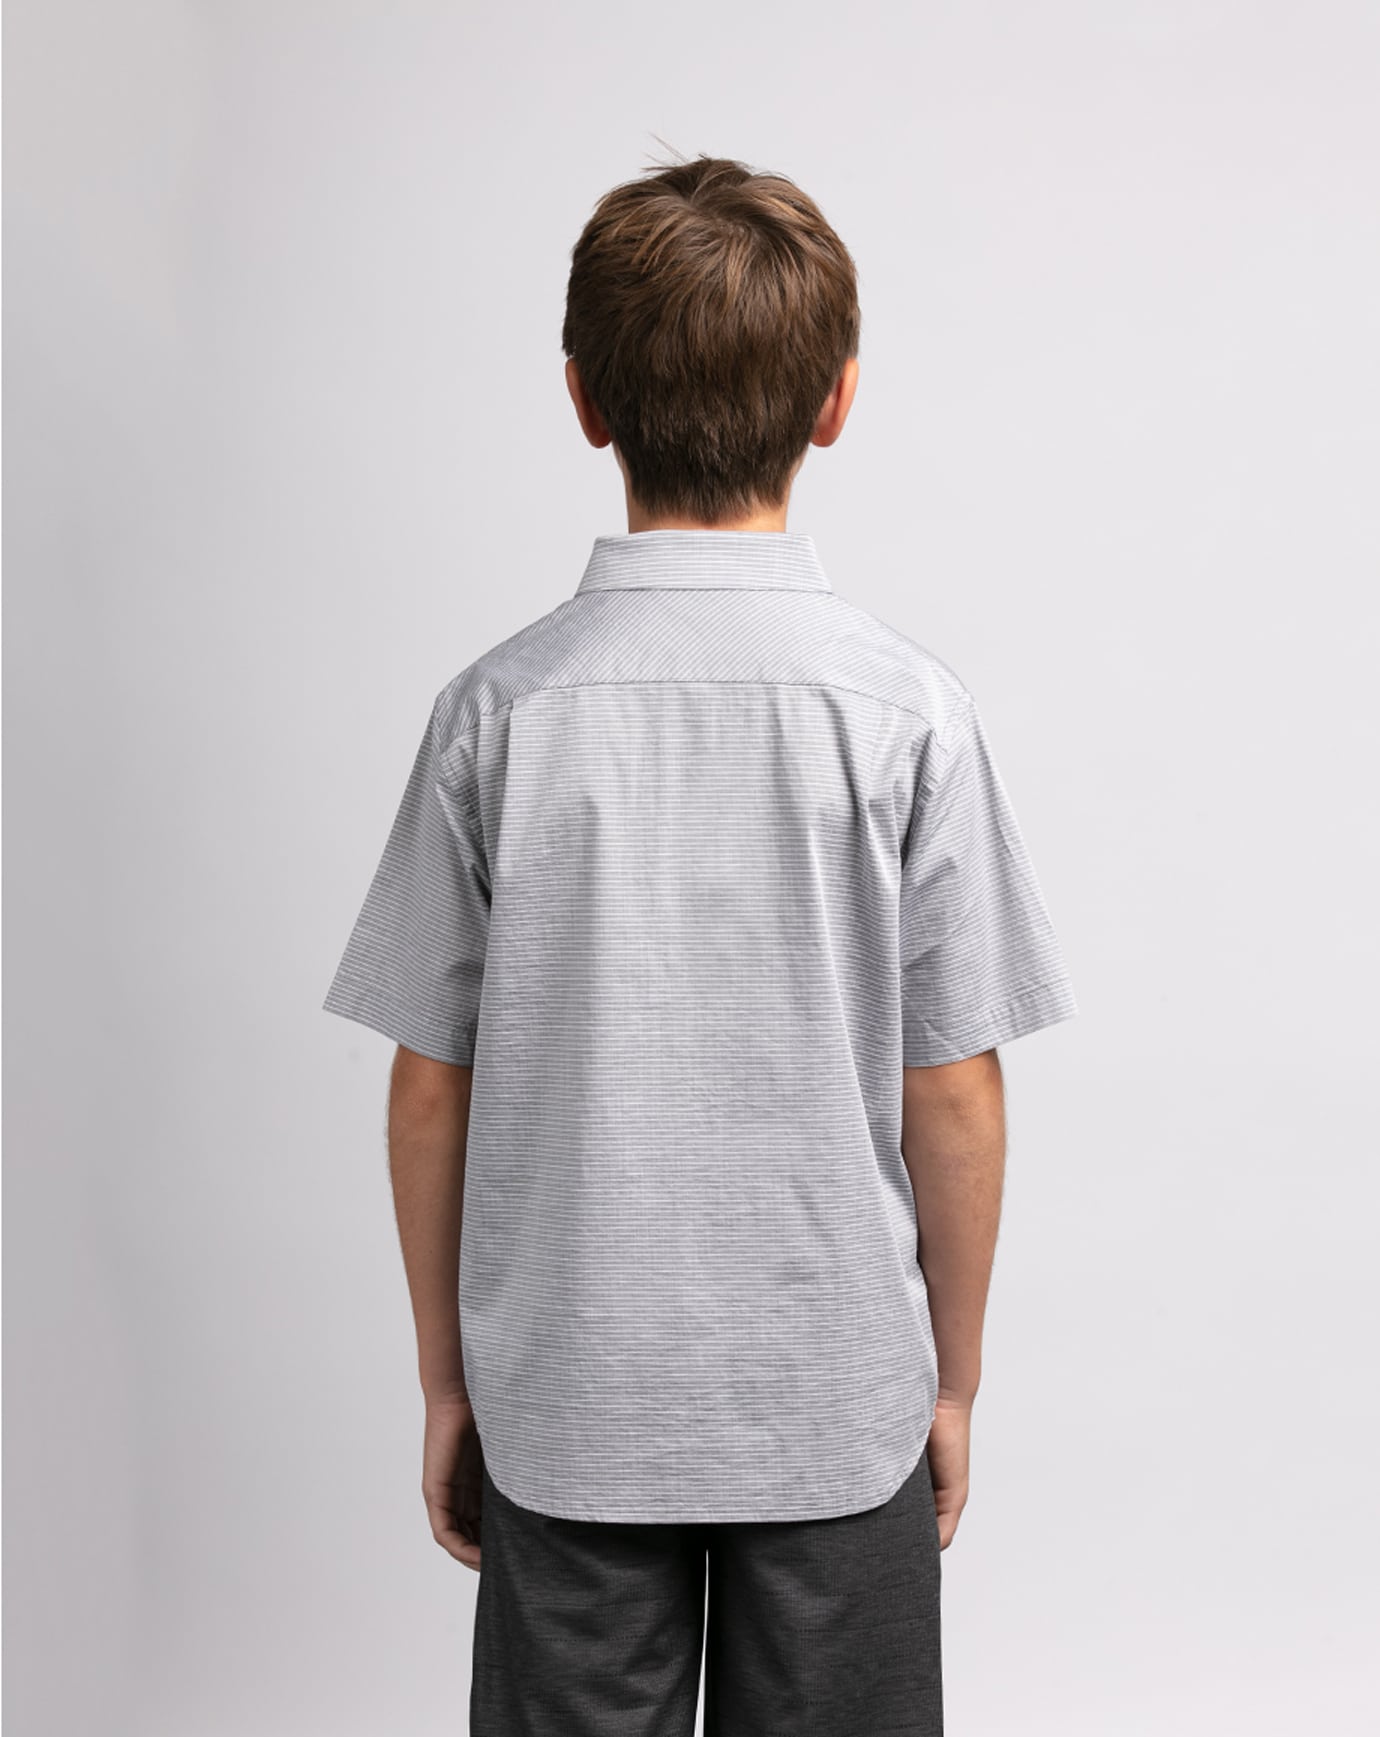 THE TAKE AWAY YOUTH BUTTON-UP Image 3